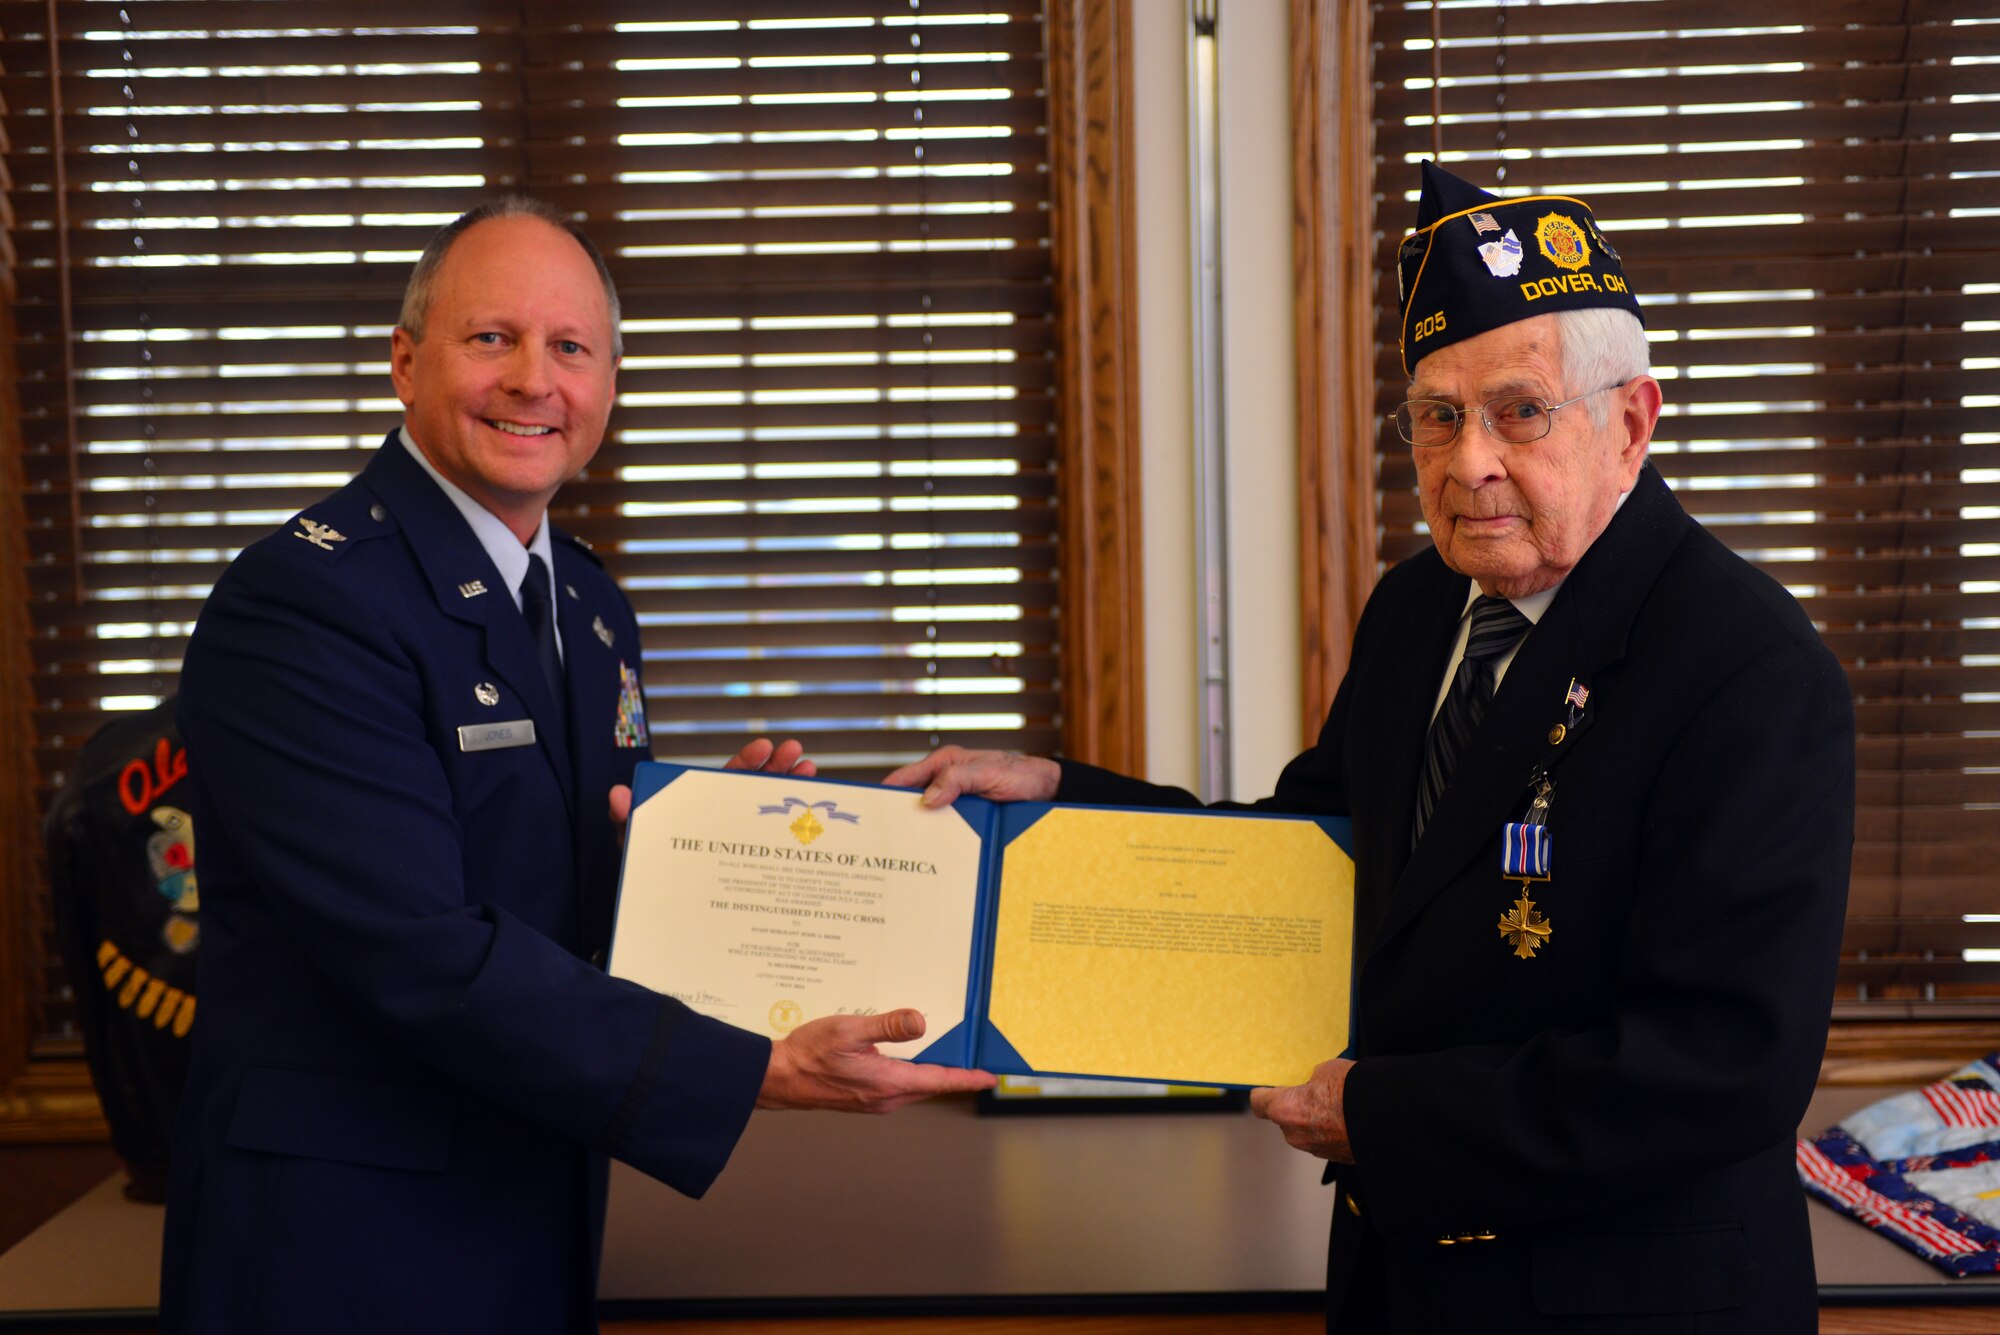 U.S. Air Force Col. Jim Jones, 121st Air Refueling Wing Commander, presents retired Staff Sgt. Jesse Reese with the Distinguished Flying Cross medal Jan. 16, 2015, in Dover, Ohio. Reese earned the medal on Dec. 31, 1944,  as a tail gunner over the skies of Hamburg, Germany. (U.S. Air National Guard photo by Master Sgt. Ralph Branson/Released)
